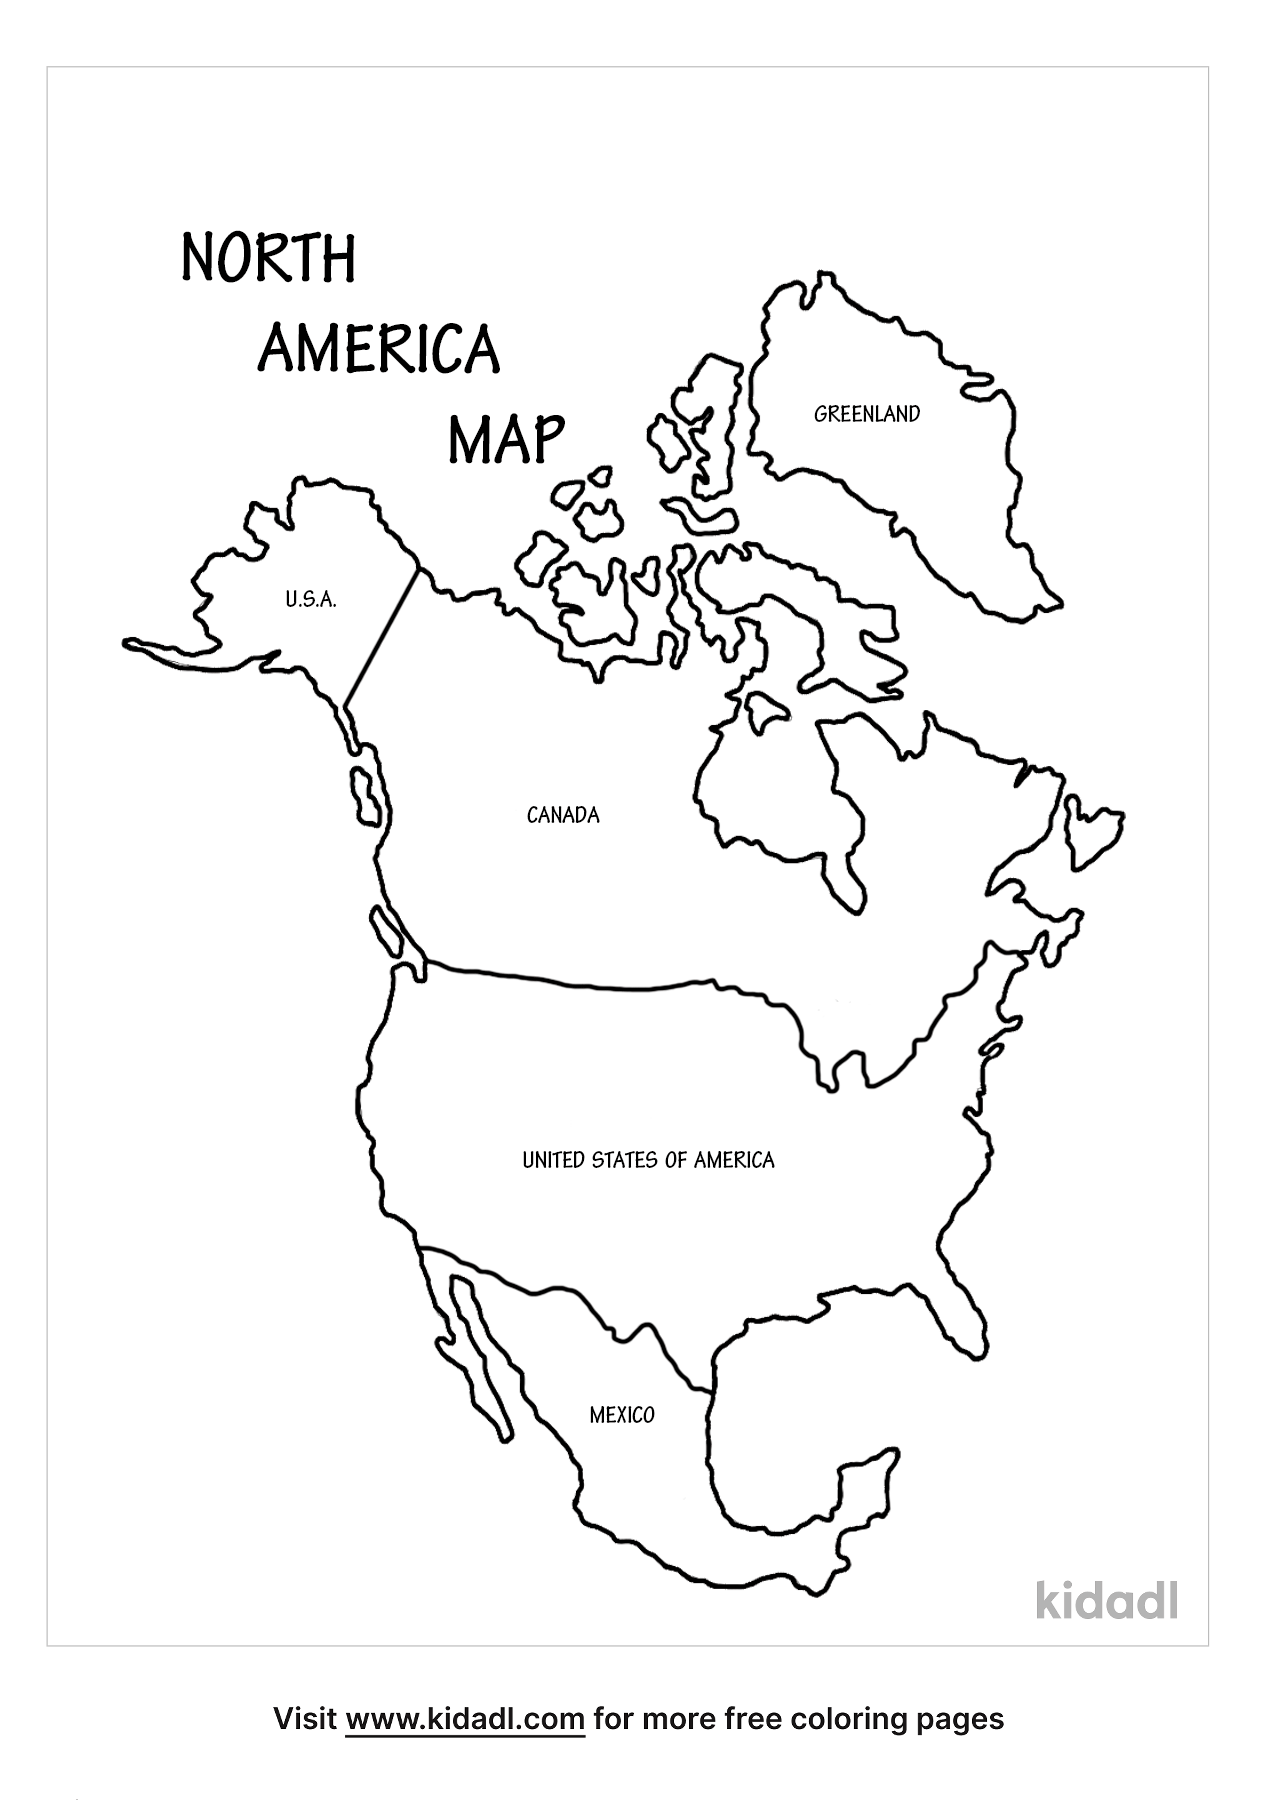 North America Map Coloring Pages | Free World, Geography & Flags Coloring  Pages | Kidadl